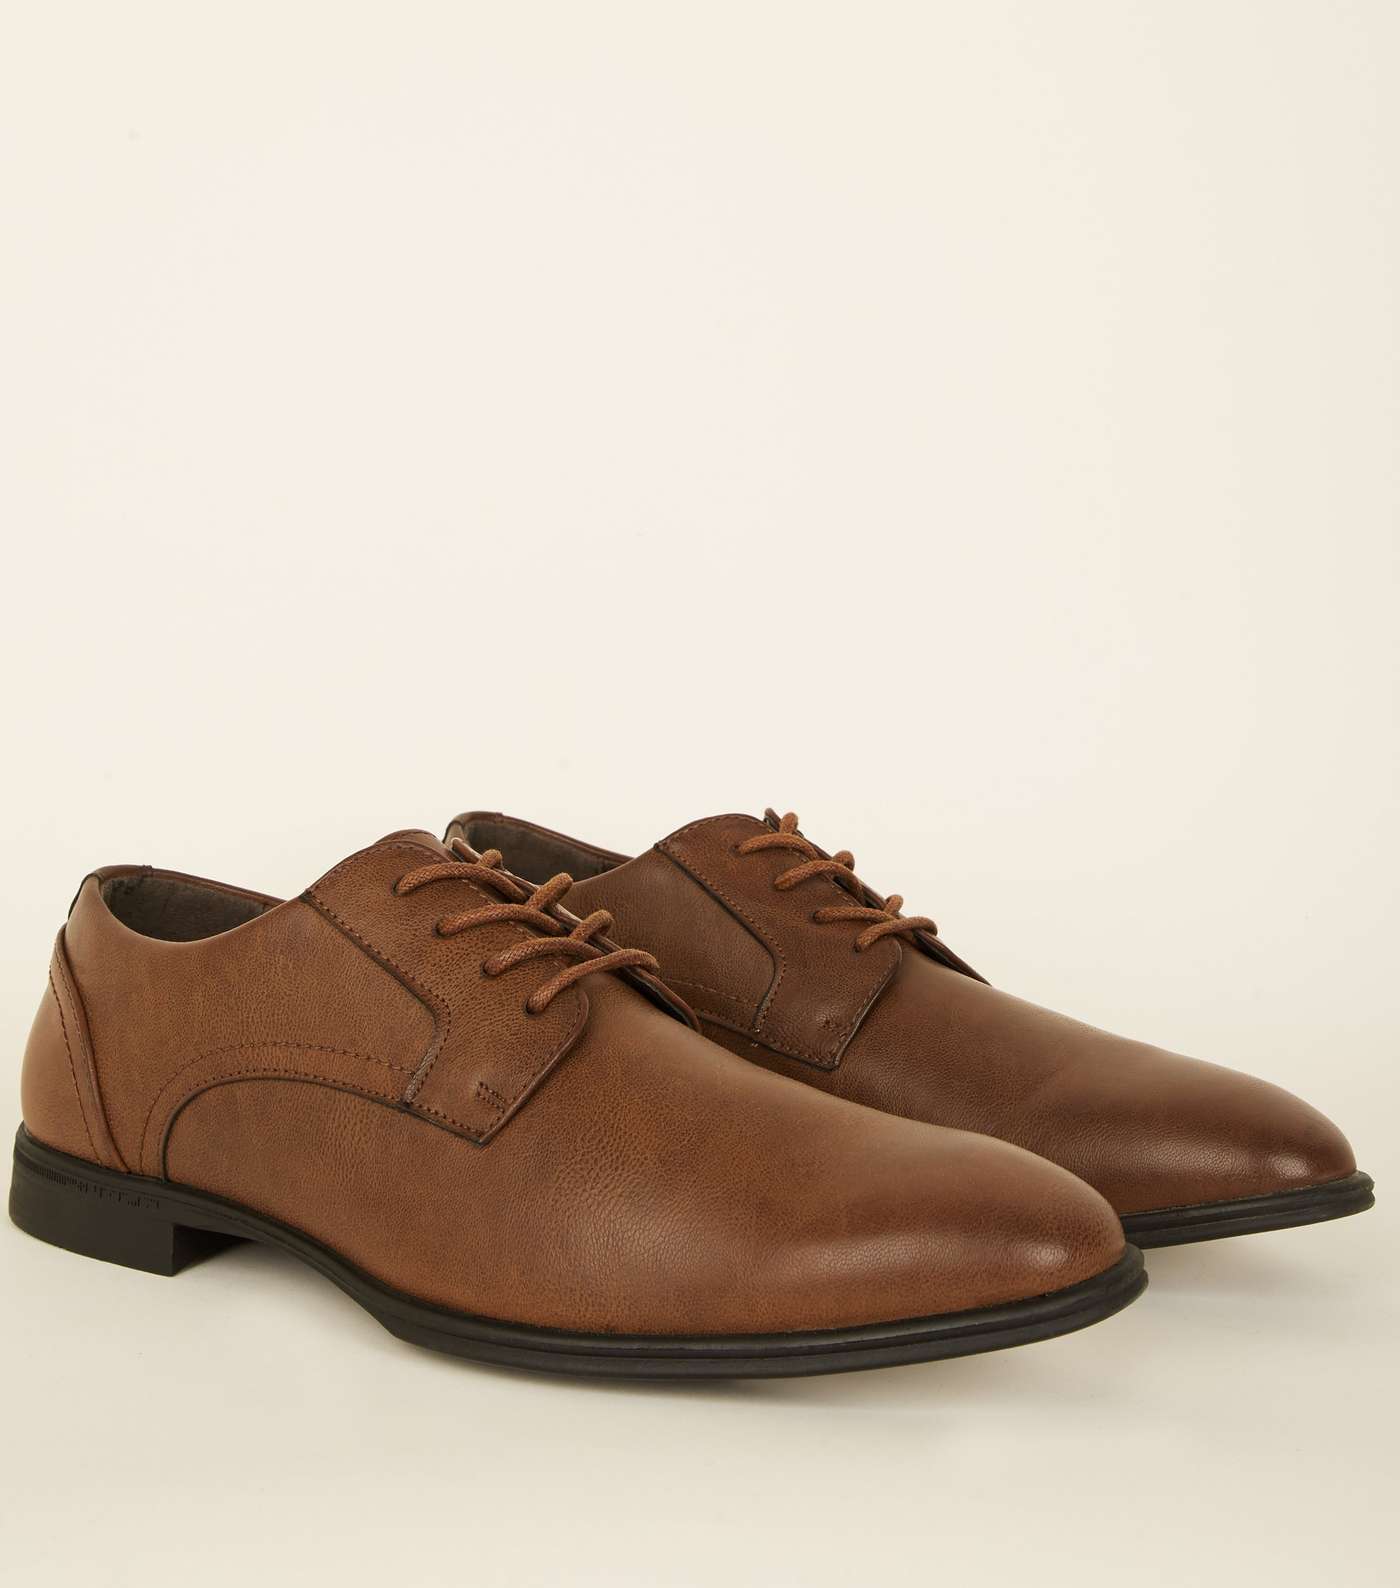 Dark Brown Leather-Look Lace-Up Formal Shoes Image 3